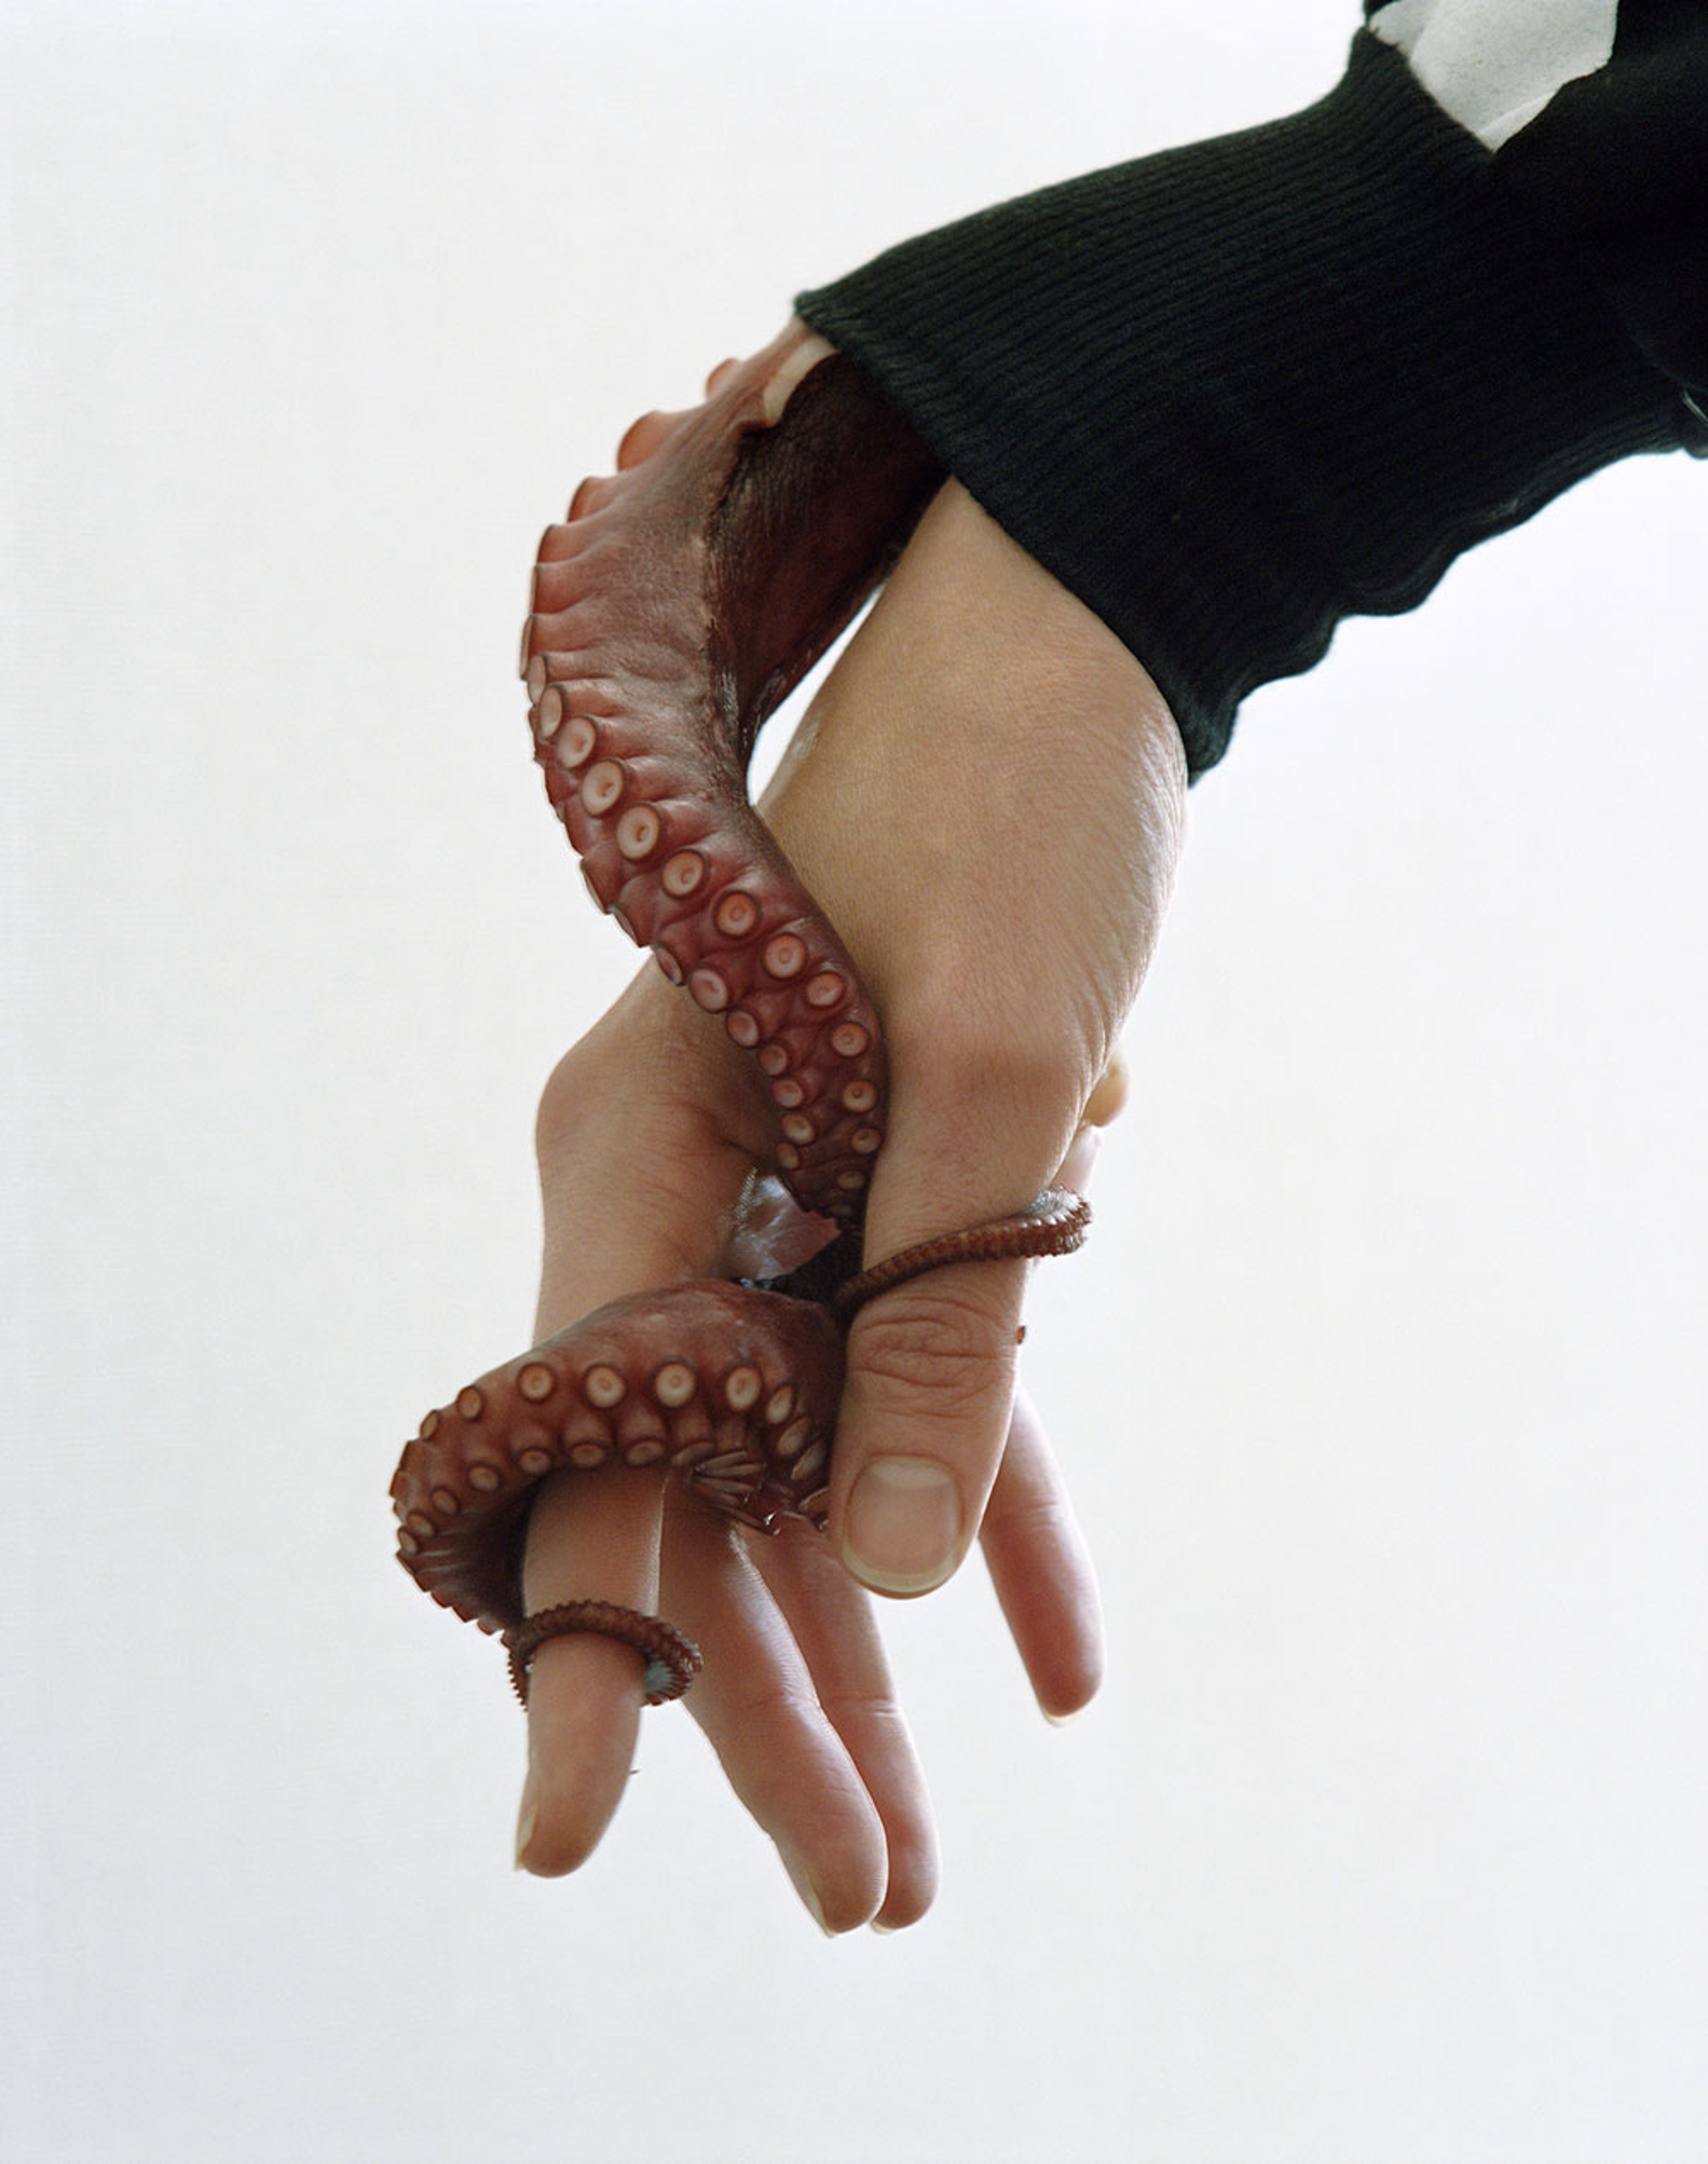 Octopus arm coming out of a person's sleeve, the octopus is wrapped around the person's finger